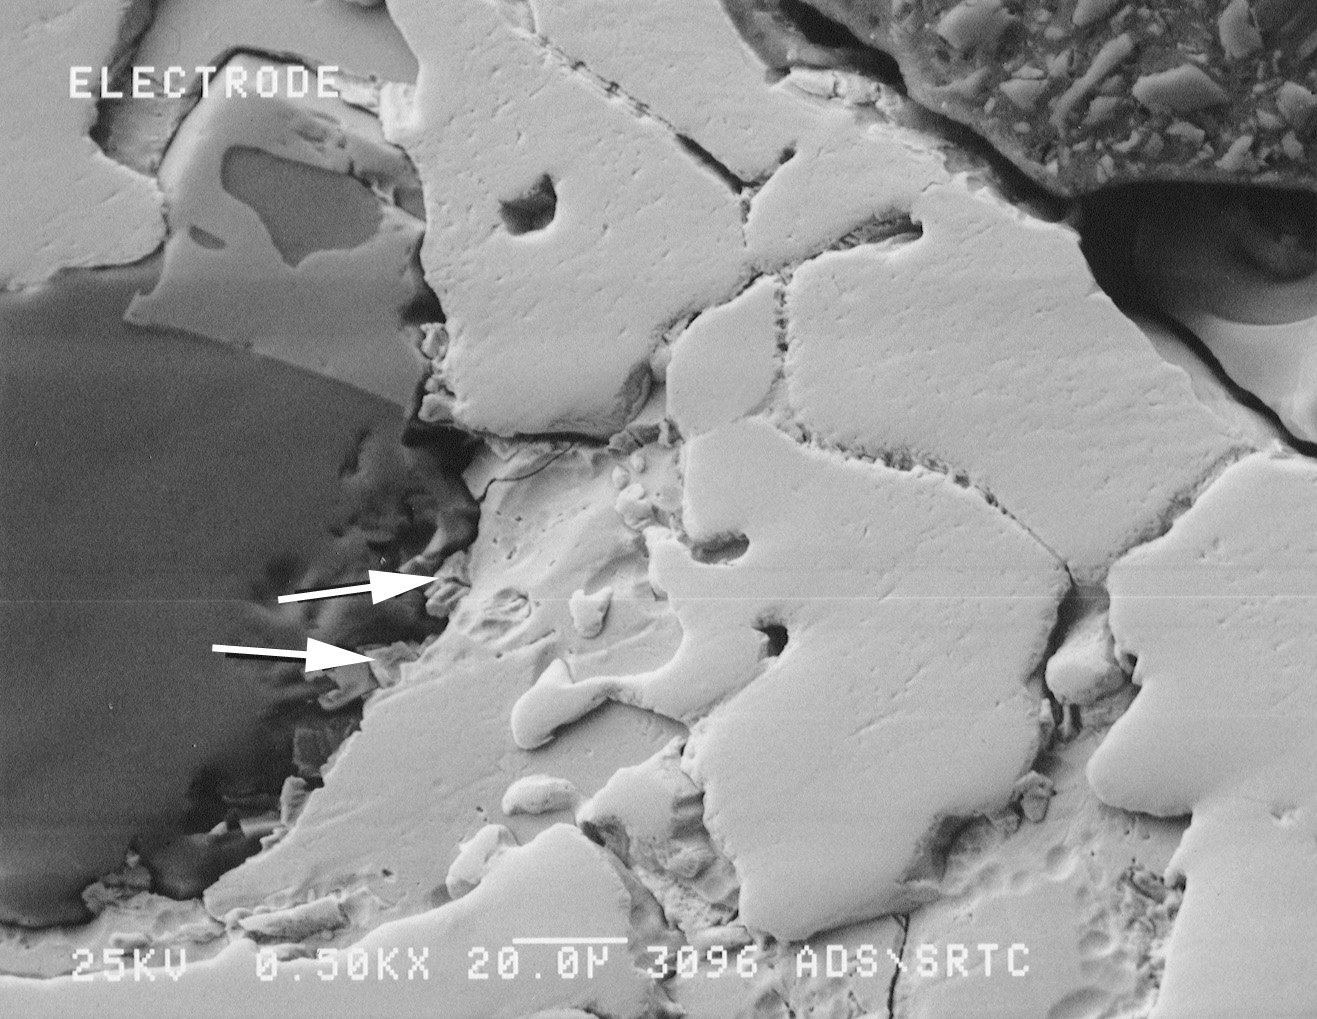 Figure 7. SEM photograph of the molybdenum electrode. EDX spectra indicated the presence of antimony on the surface of the electrode. Nickel from the Inconel sheath was also present.